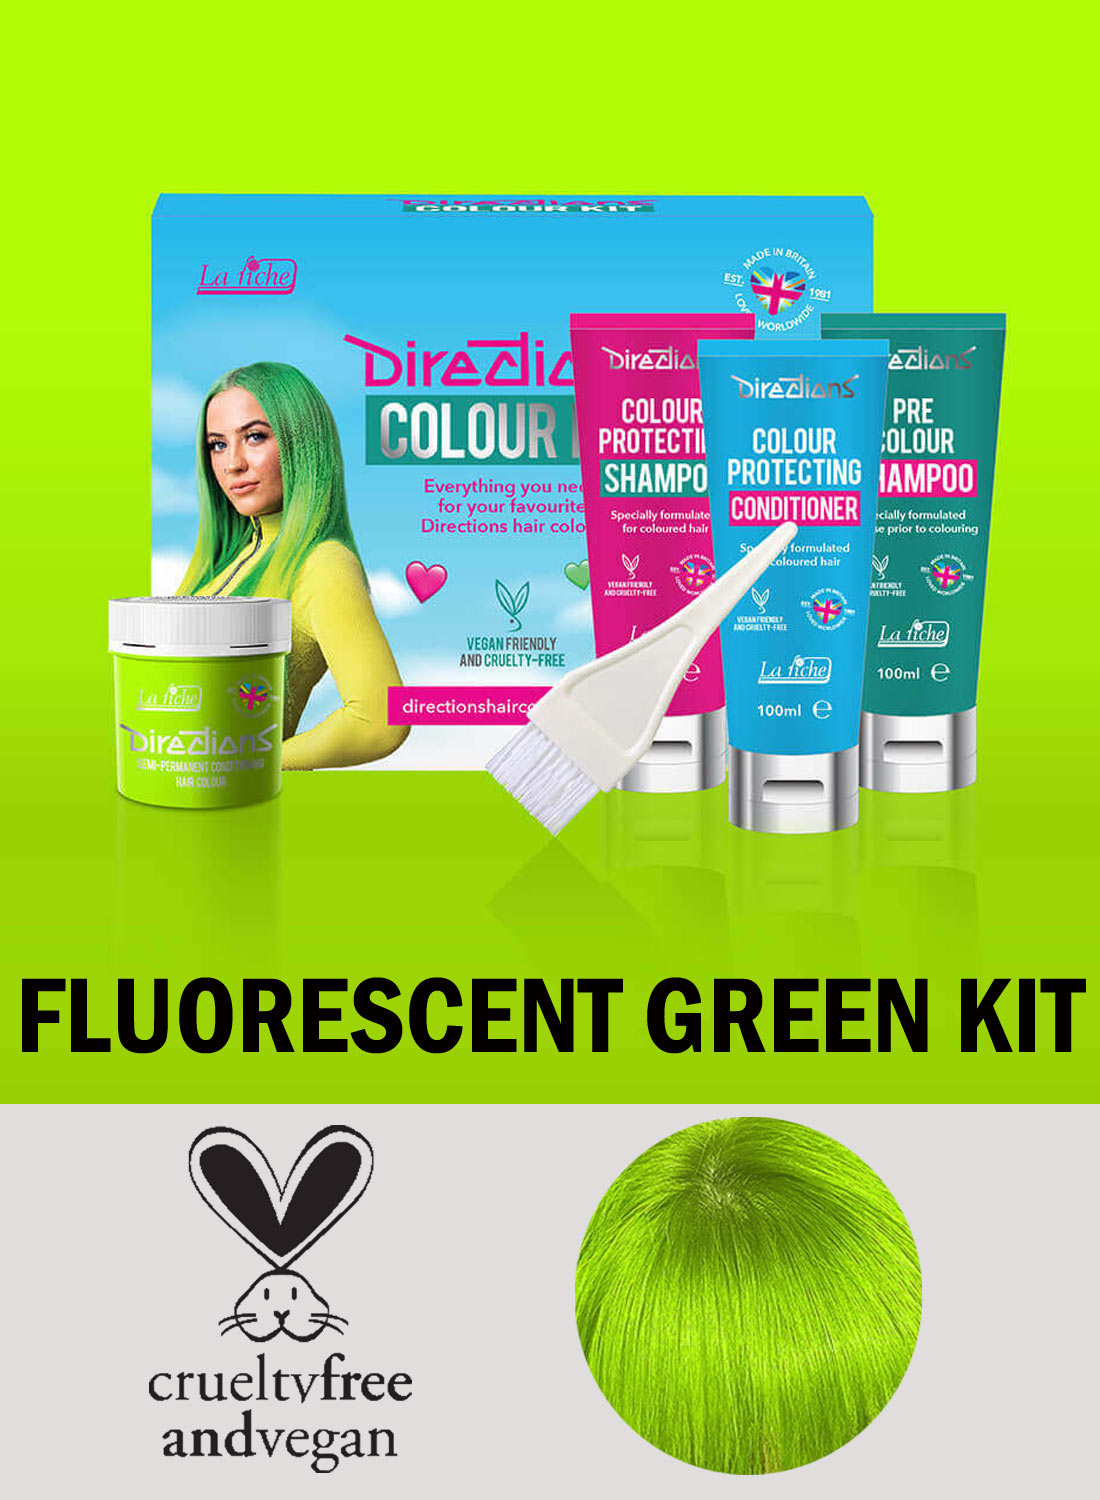 Directions Hair Colour Fluorescent Green kit